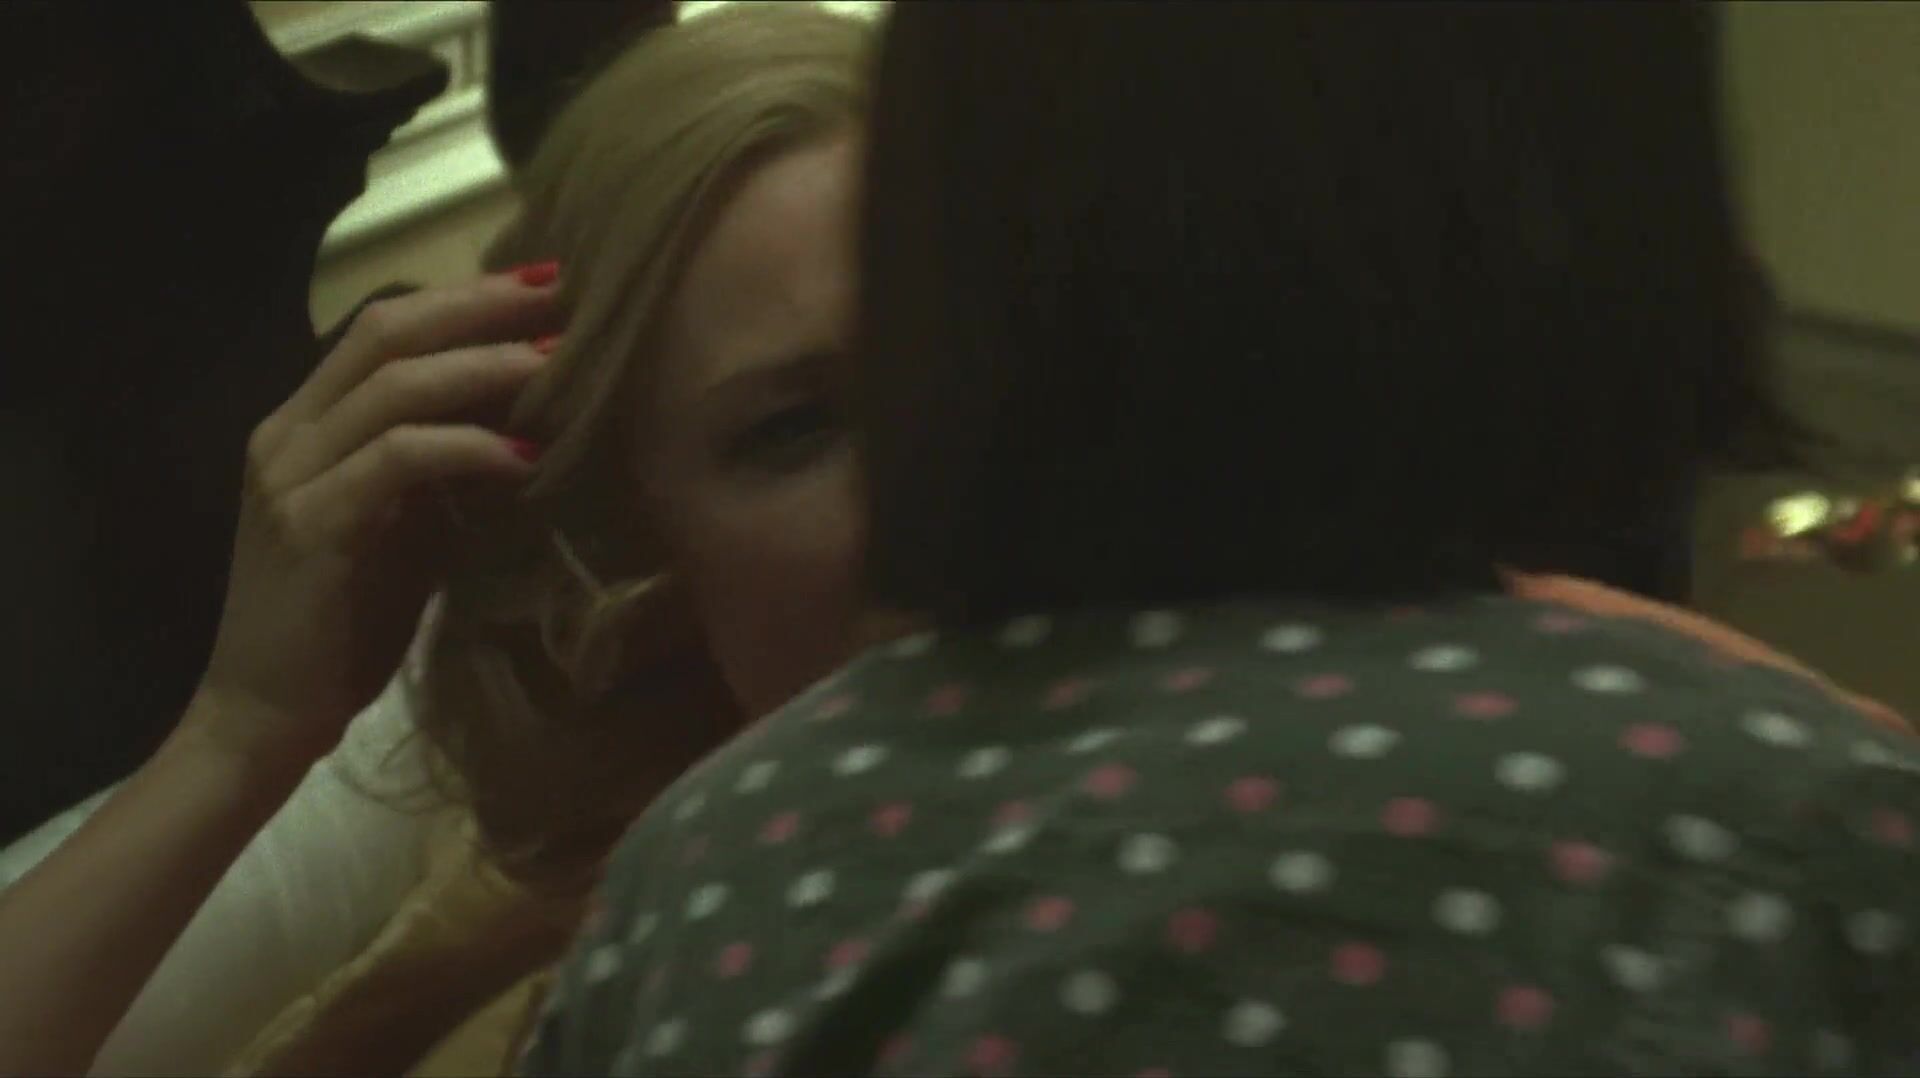 X-Angels Erotic lesbian women from movie industry bang each other in drama film Carol (2014) ASSTR - 1